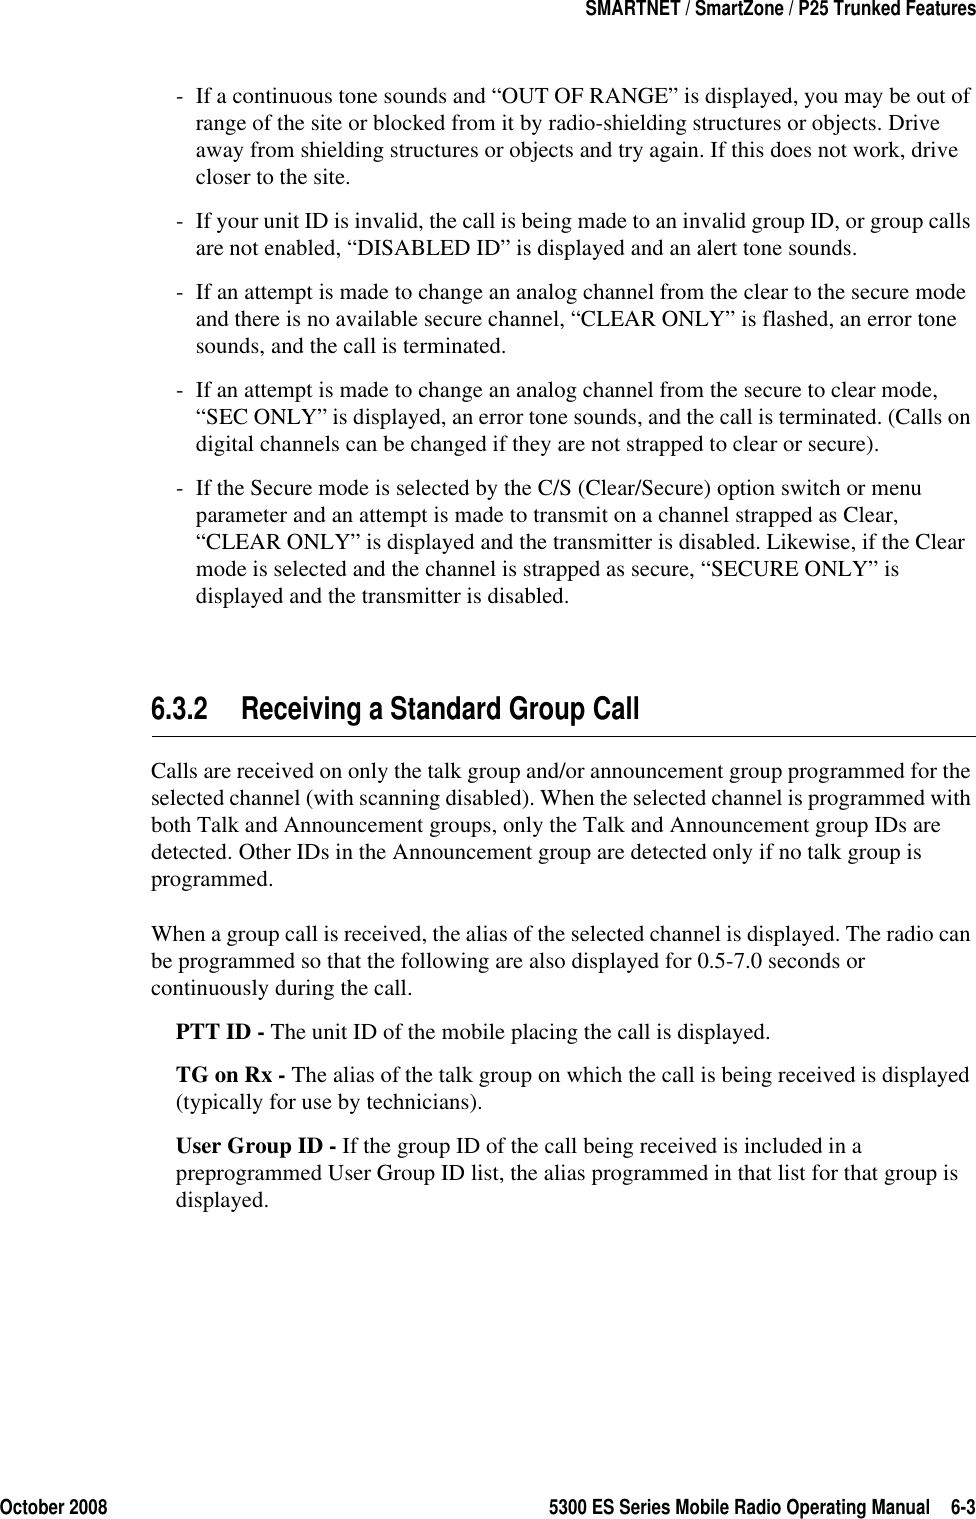 October 2008 5300 ES Series Mobile Radio Operating Manual 6-3SMARTNET / SmartZone / P25 Trunked Features- If a continuous tone sounds and “OUT OF RANGE” is displayed, you may be out of range of the site or blocked from it by radio-shielding structures or objects. Drive away from shielding structures or objects and try again. If this does not work, drive closer to the site.- If your unit ID is invalid, the call is being made to an invalid group ID, or group calls are not enabled, “DISABLED ID” is displayed and an alert tone sounds.- If an attempt is made to change an analog channel from the clear to the secure mode and there is no available secure channel, “CLEAR ONLY” is flashed, an error tone sounds, and the call is terminated.- If an attempt is made to change an analog channel from the secure to clear mode, “SEC ONLY” is displayed, an error tone sounds, and the call is terminated. (Calls on digital channels can be changed if they are not strapped to clear or secure).- If the Secure mode is selected by the C/S (Clear/Secure) option switch or menu parameter and an attempt is made to transmit on a channel strapped as Clear, “CLEAR ONLY” is displayed and the transmitter is disabled. Likewise, if the Clear mode is selected and the channel is strapped as secure, “SECURE ONLY” is displayed and the transmitter is disabled.6.3.2 Receiving a Standard Group CallCalls are received on only the talk group and/or announcement group programmed for the selected channel (with scanning disabled). When the selected channel is programmed with both Talk and Announcement groups, only the Talk and Announcement group IDs are detected. Other IDs in the Announcement group are detected only if no talk group is programmed.When a group call is received, the alias of the selected channel is displayed. The radio can be programmed so that the following are also displayed for 0.5-7.0 seconds or continuously during the call.PTT ID - The unit ID of the mobile placing the call is displayed.TG on Rx - The alias of the talk group on which the call is being received is displayed (typically for use by technicians).User Group ID - If the group ID of the call being received is included in a preprogrammed User Group ID list, the alias programmed in that list for that group is displayed.